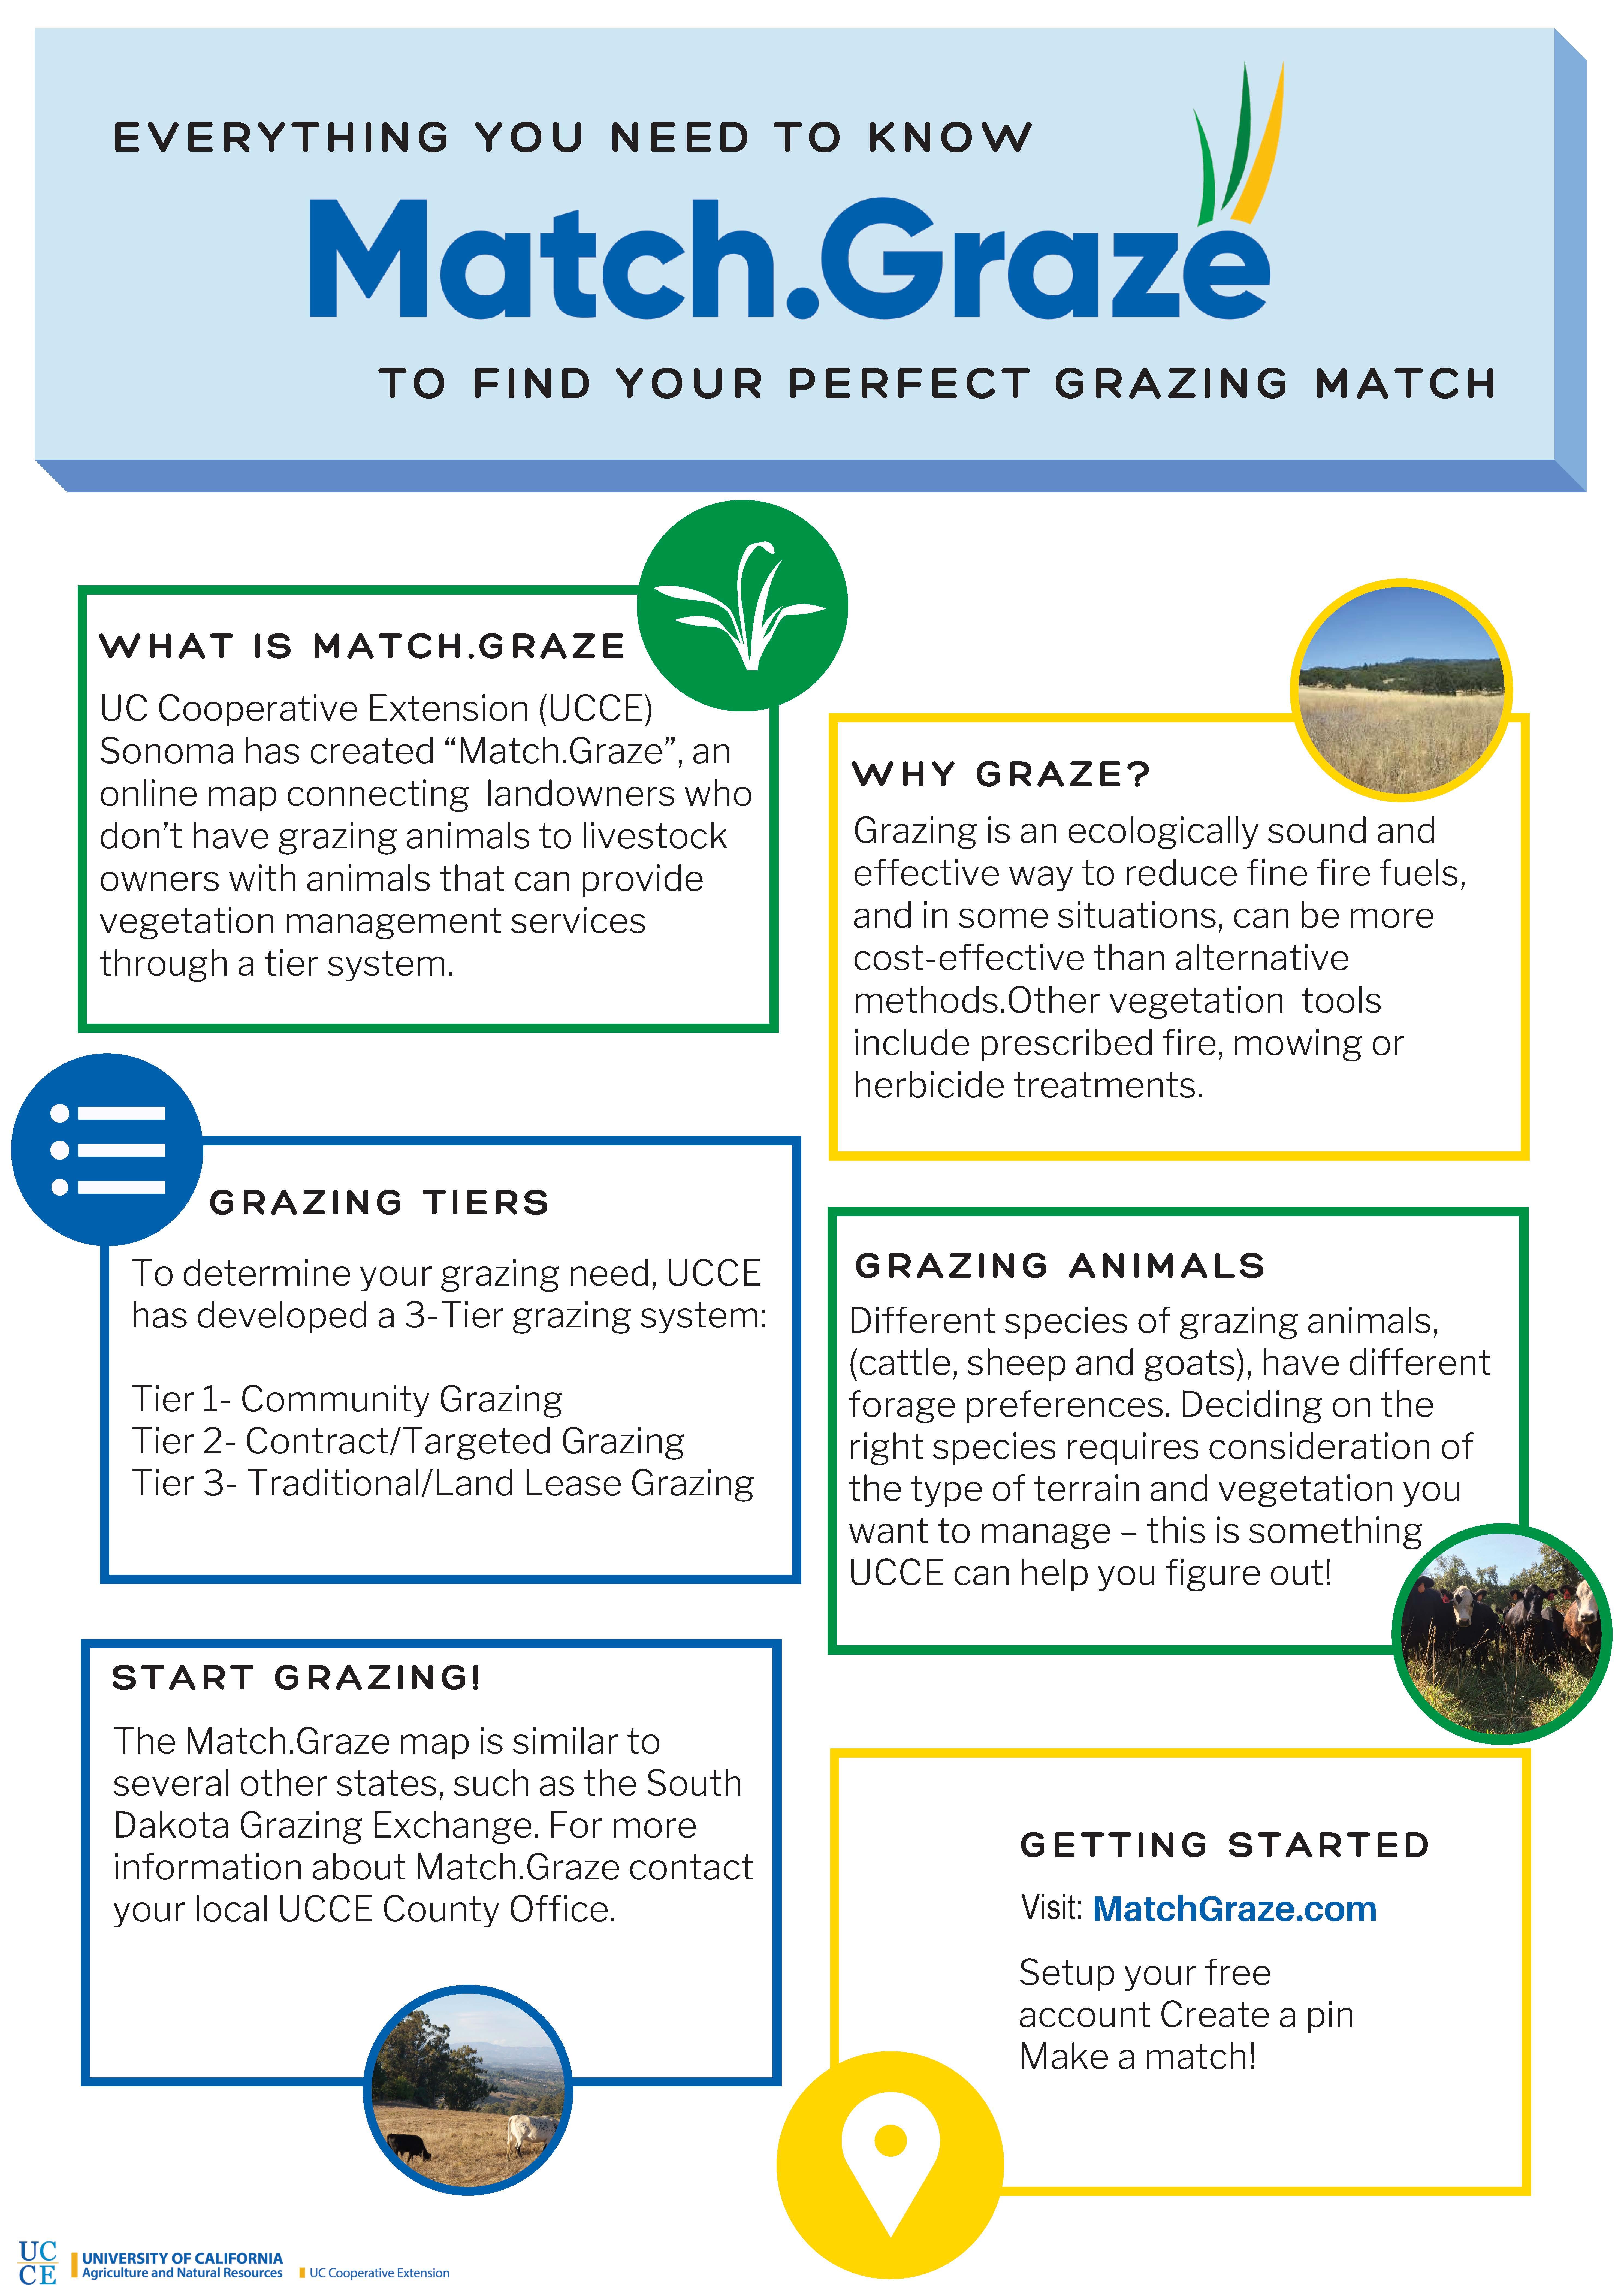 jpg Match.Graze Everything you need to know